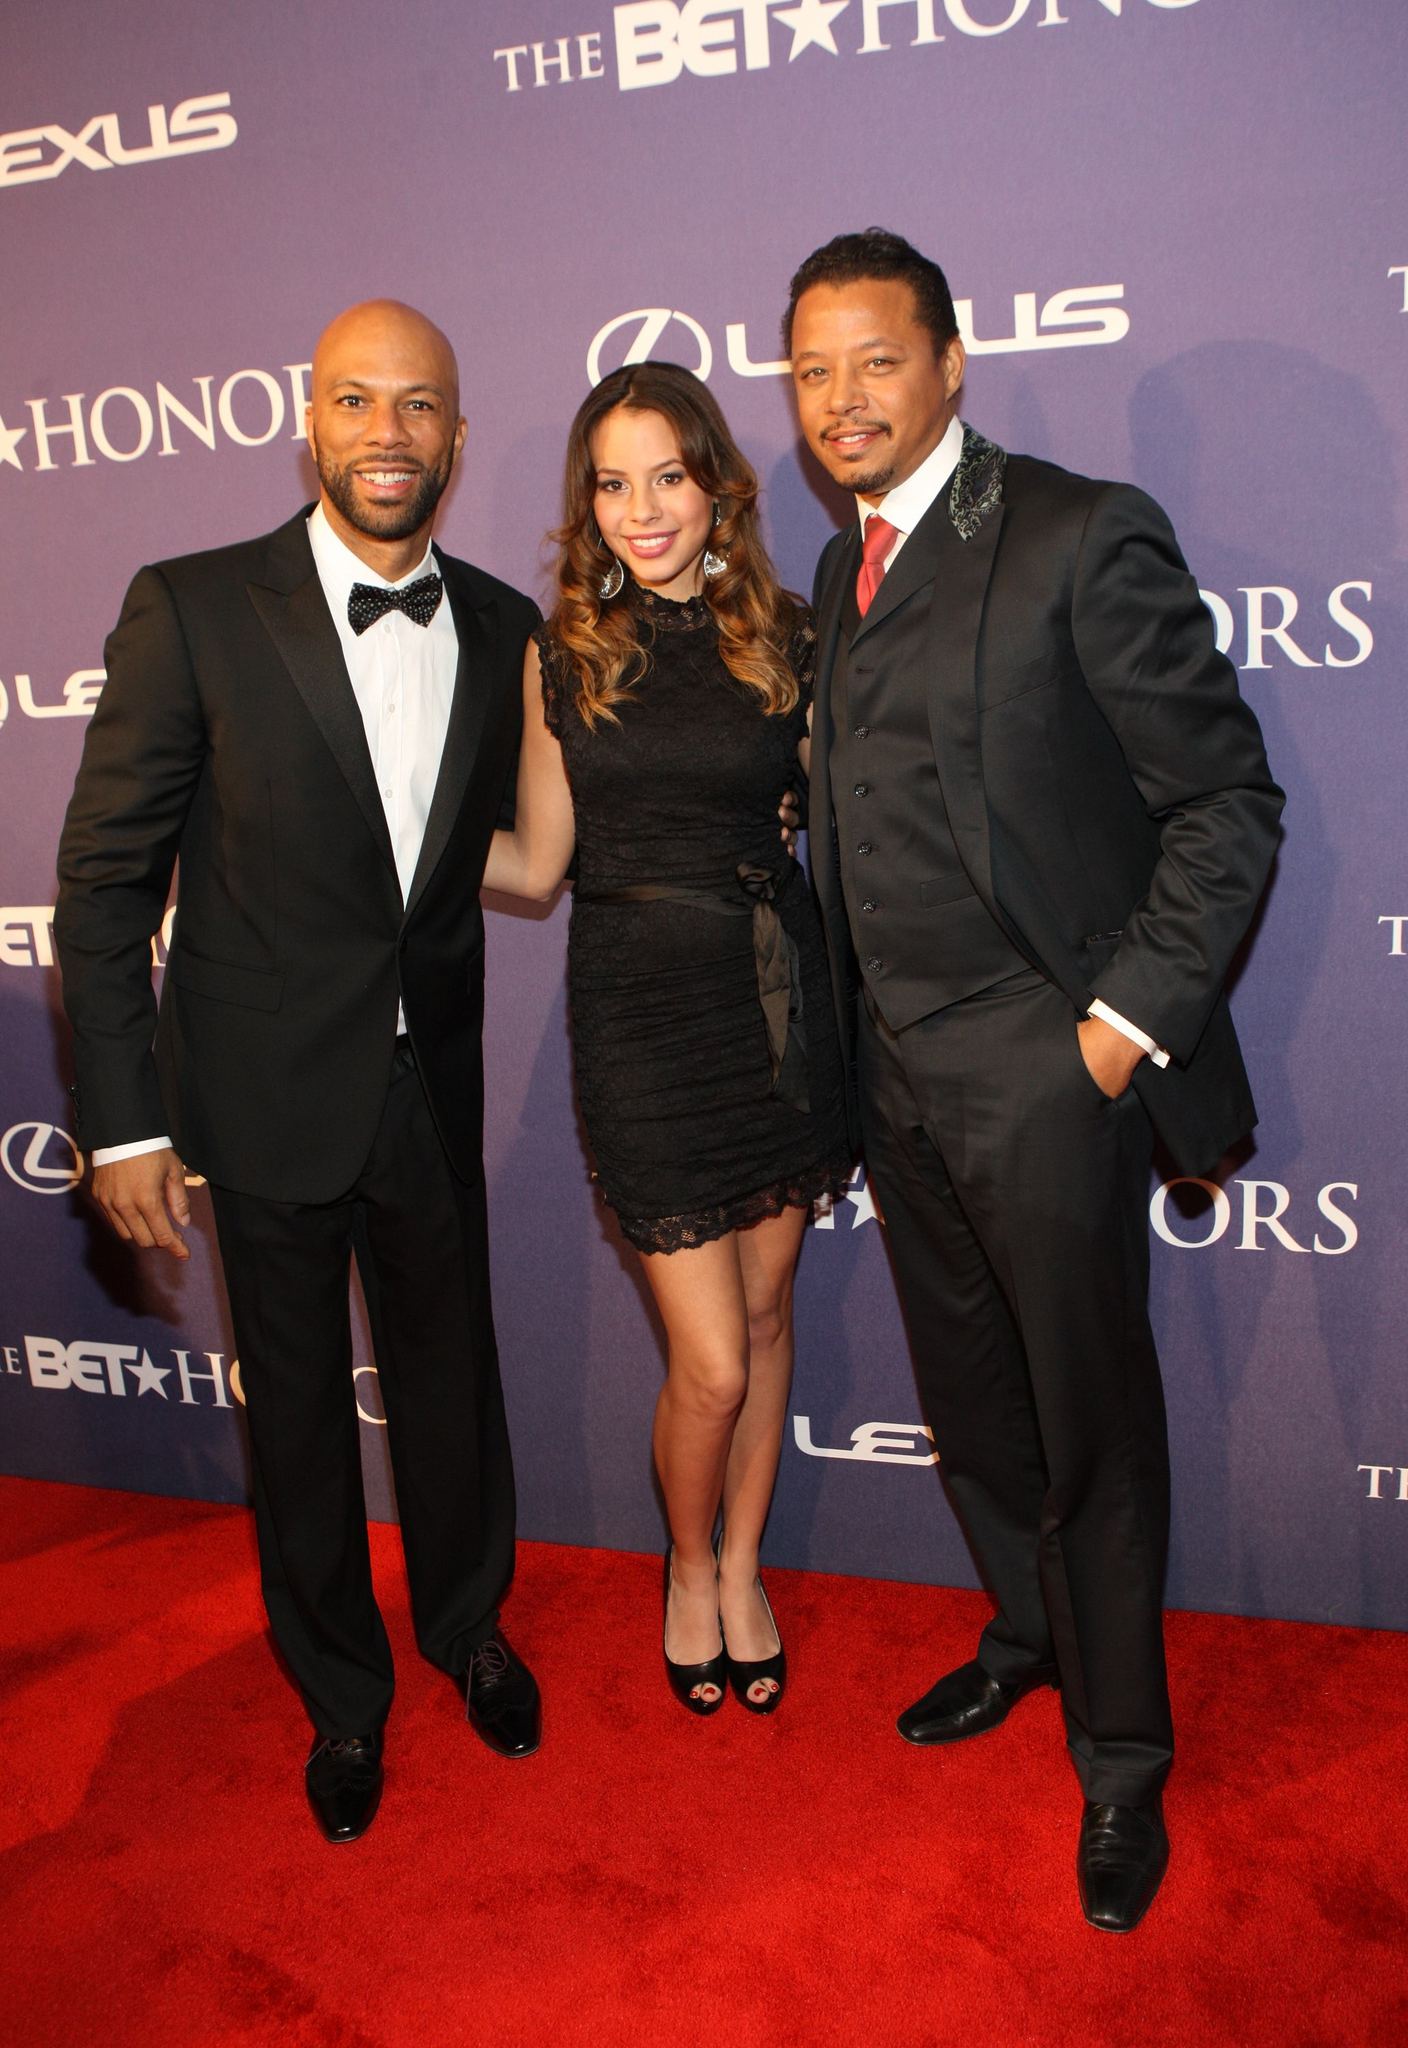 Terrence Howard and Common